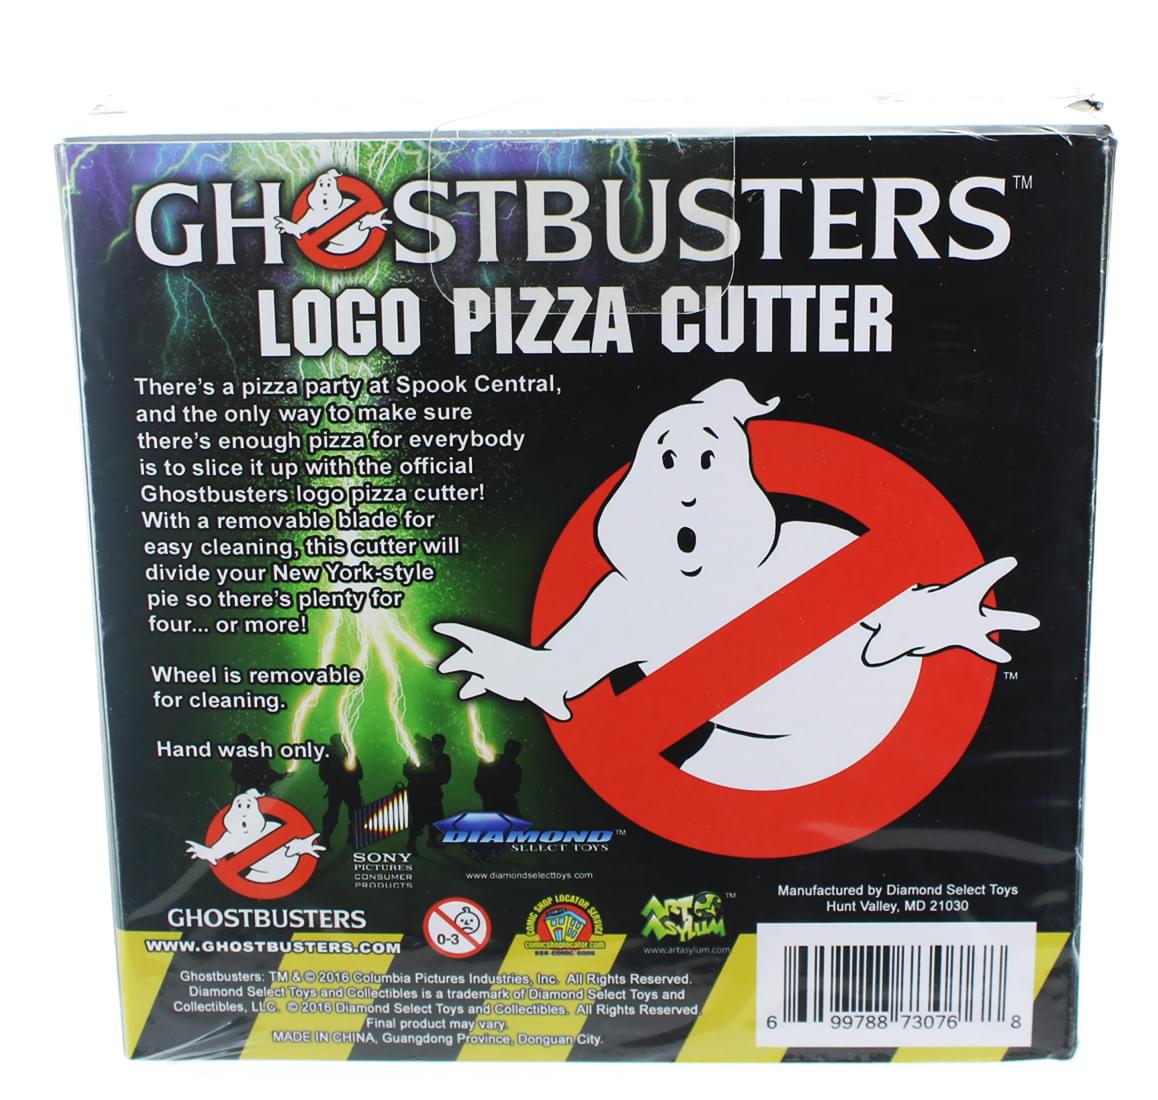 Ghostbusters Logo Pizza Cutter